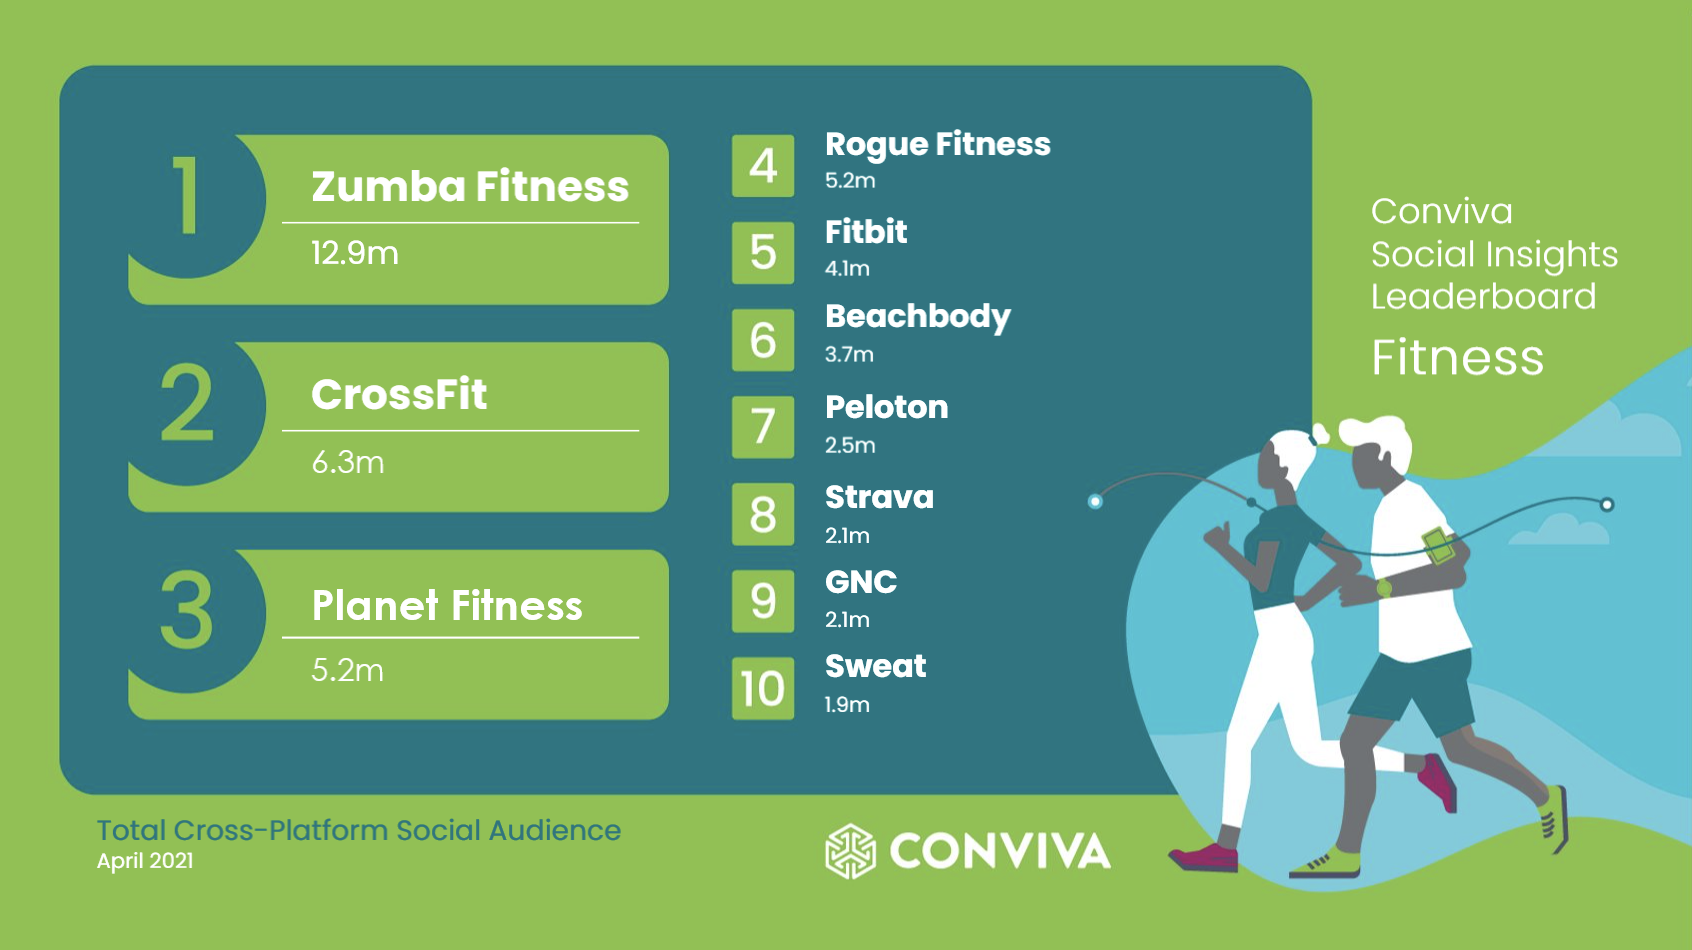 Top Fitness Social Accounts by Cross Platform audience